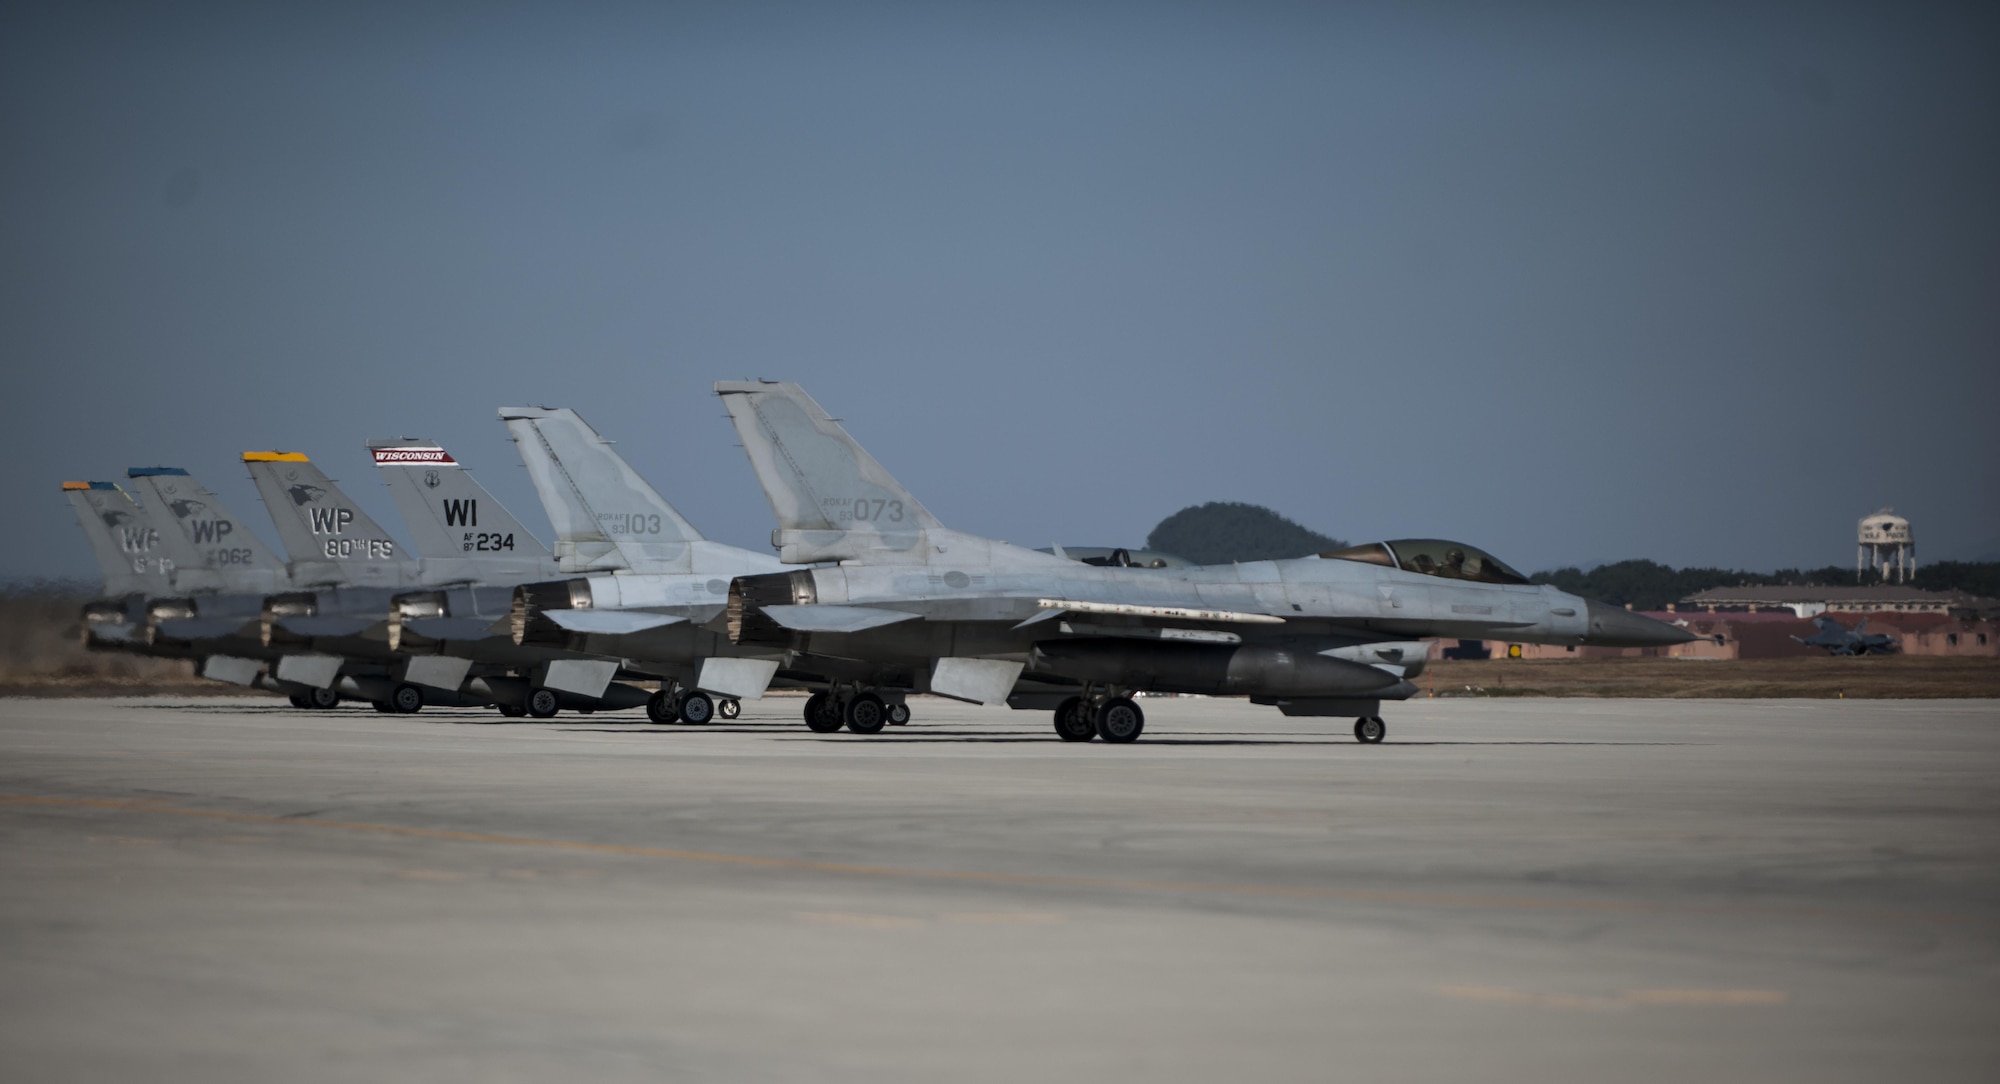 U.S. Air Force pilots assigned to the 8th Fighter Wing and 115th Fighter Wing with Republic of Korea Air Force pilots assigned to the 38th Fighter Group wait to takeoff at Kunsan Air Base, Republic of Korea, Oct. 30, 2017. The pilots carried out a “Friendship Flight” mission, continuing a long partnership of mutually strengthening cross-cultural communications and mission capabilities, ultimately enabling a better posture to execute the combat mission of “Take the Fight North” if called upon to do so. (U.S. Air Force photo by Staff Sgt. Victoria Taylor